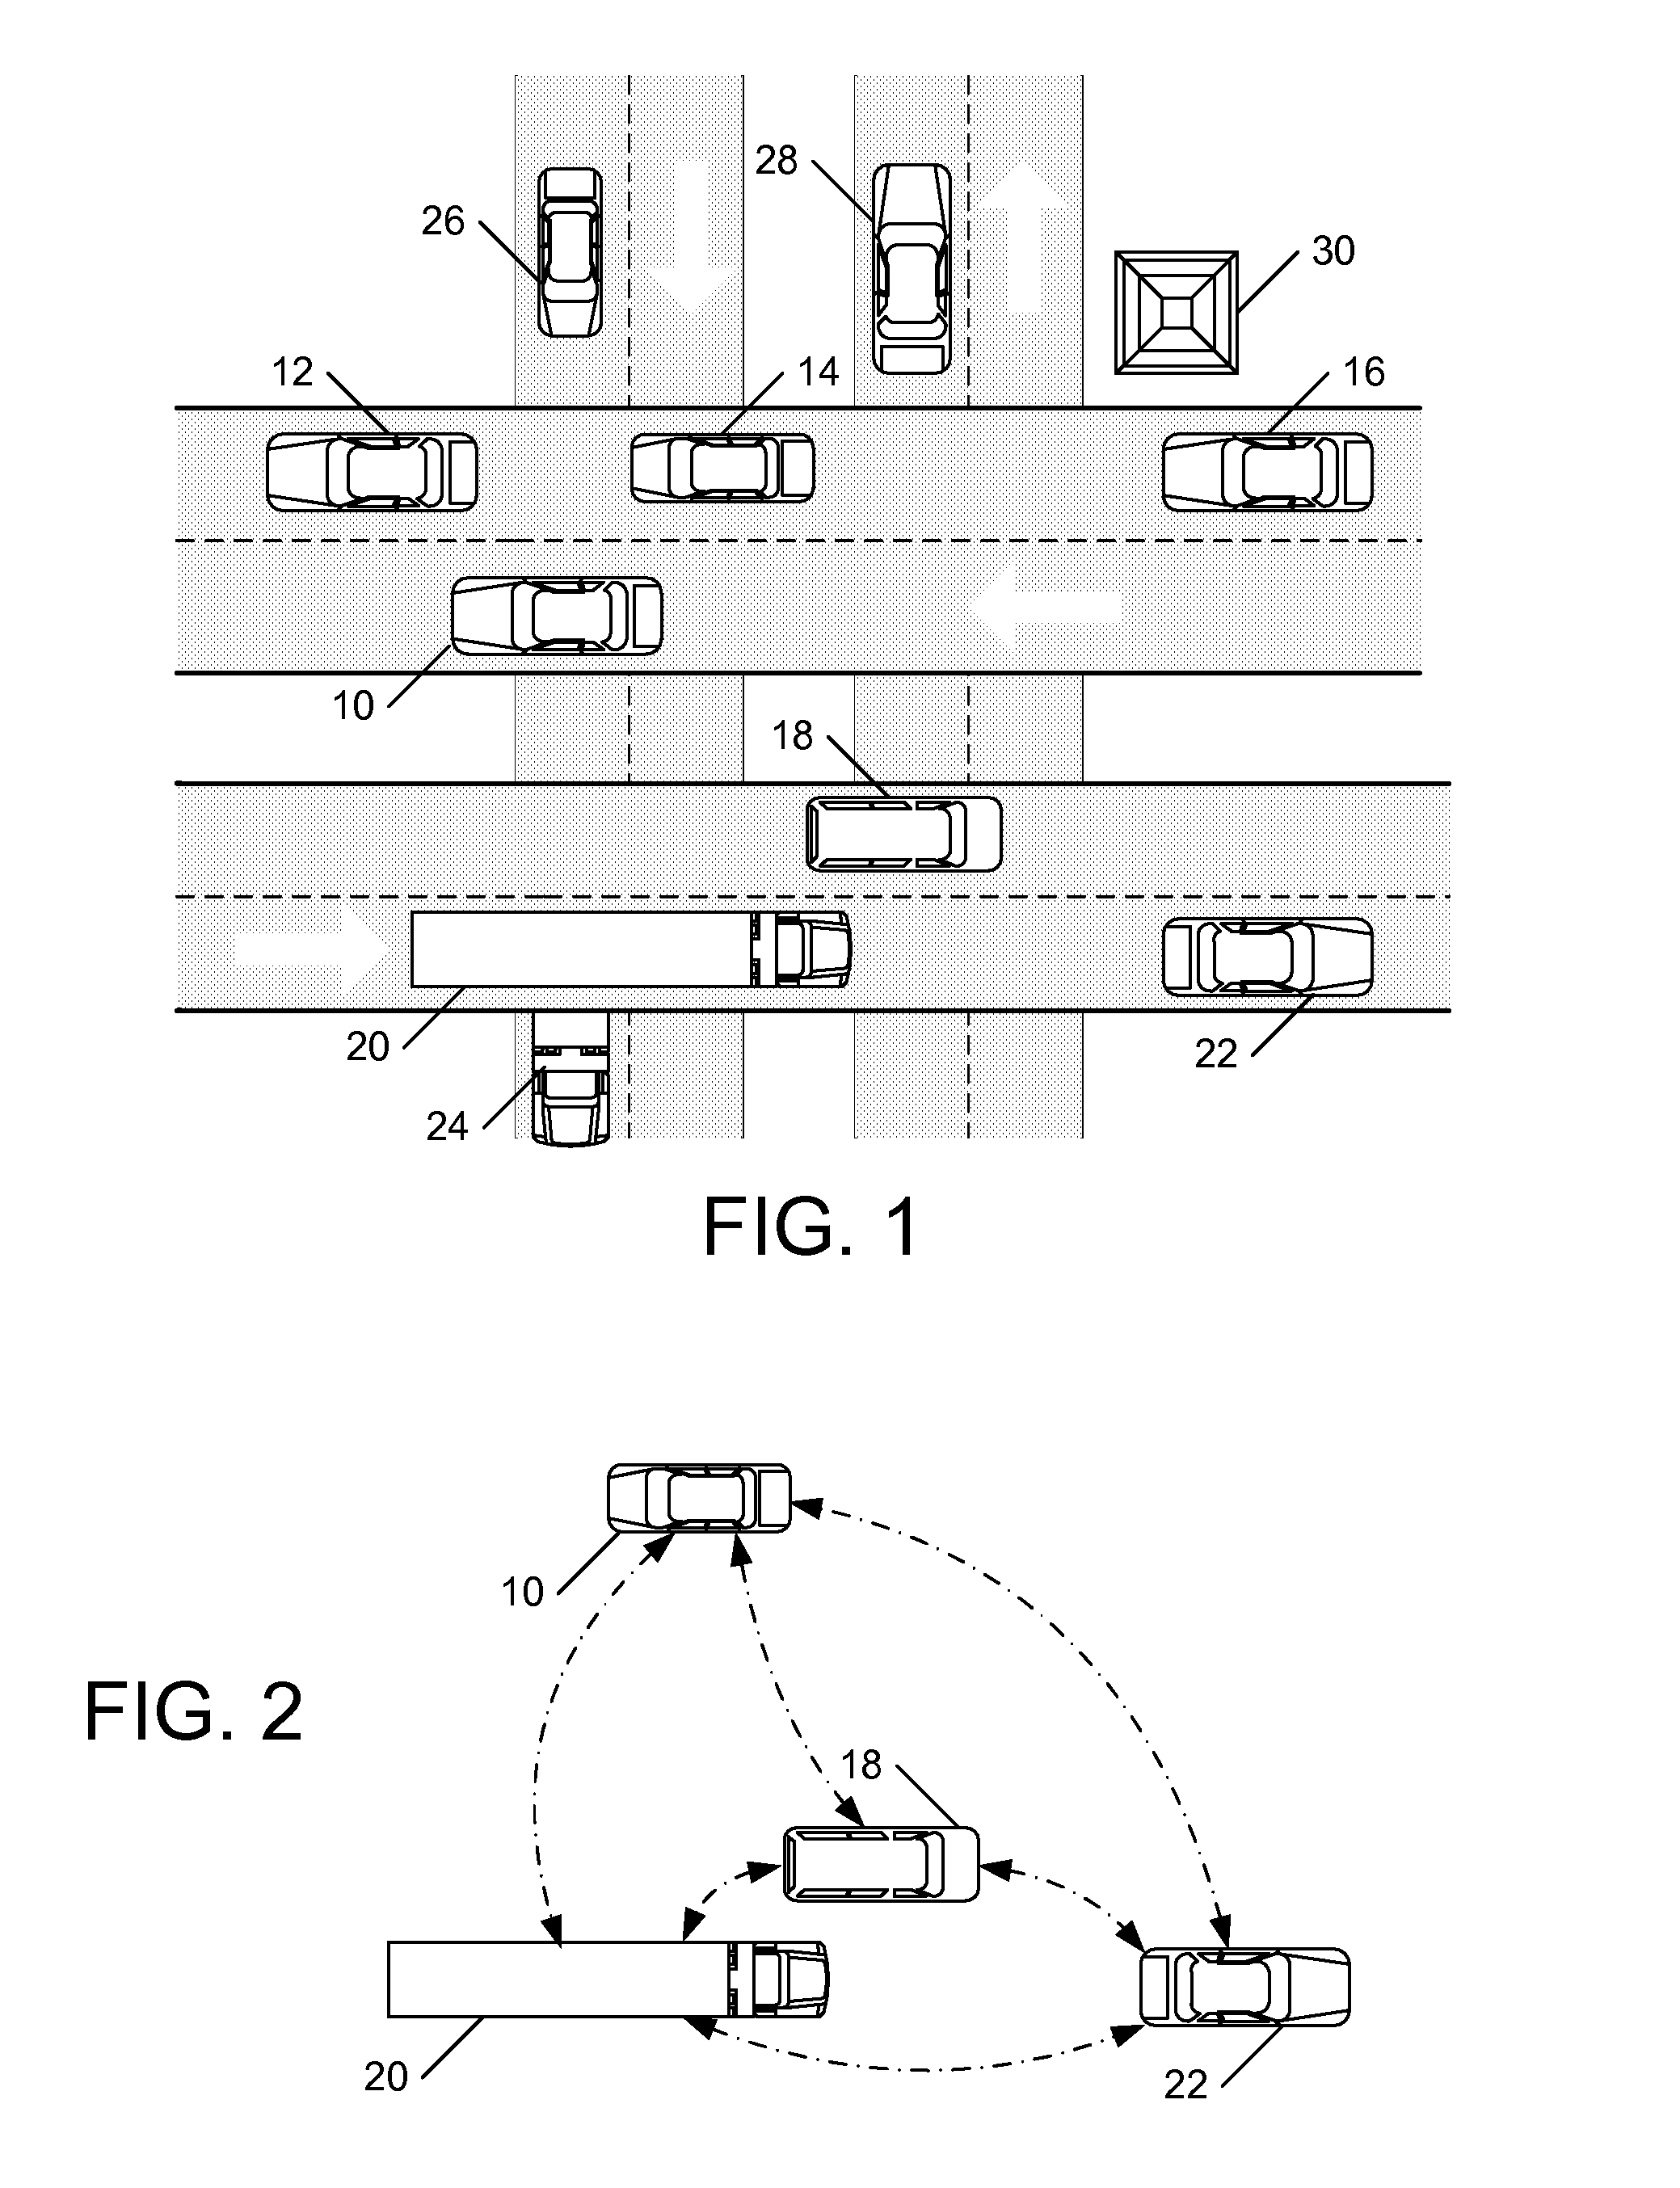 Scene selection in a vehicle-to-vehicle network